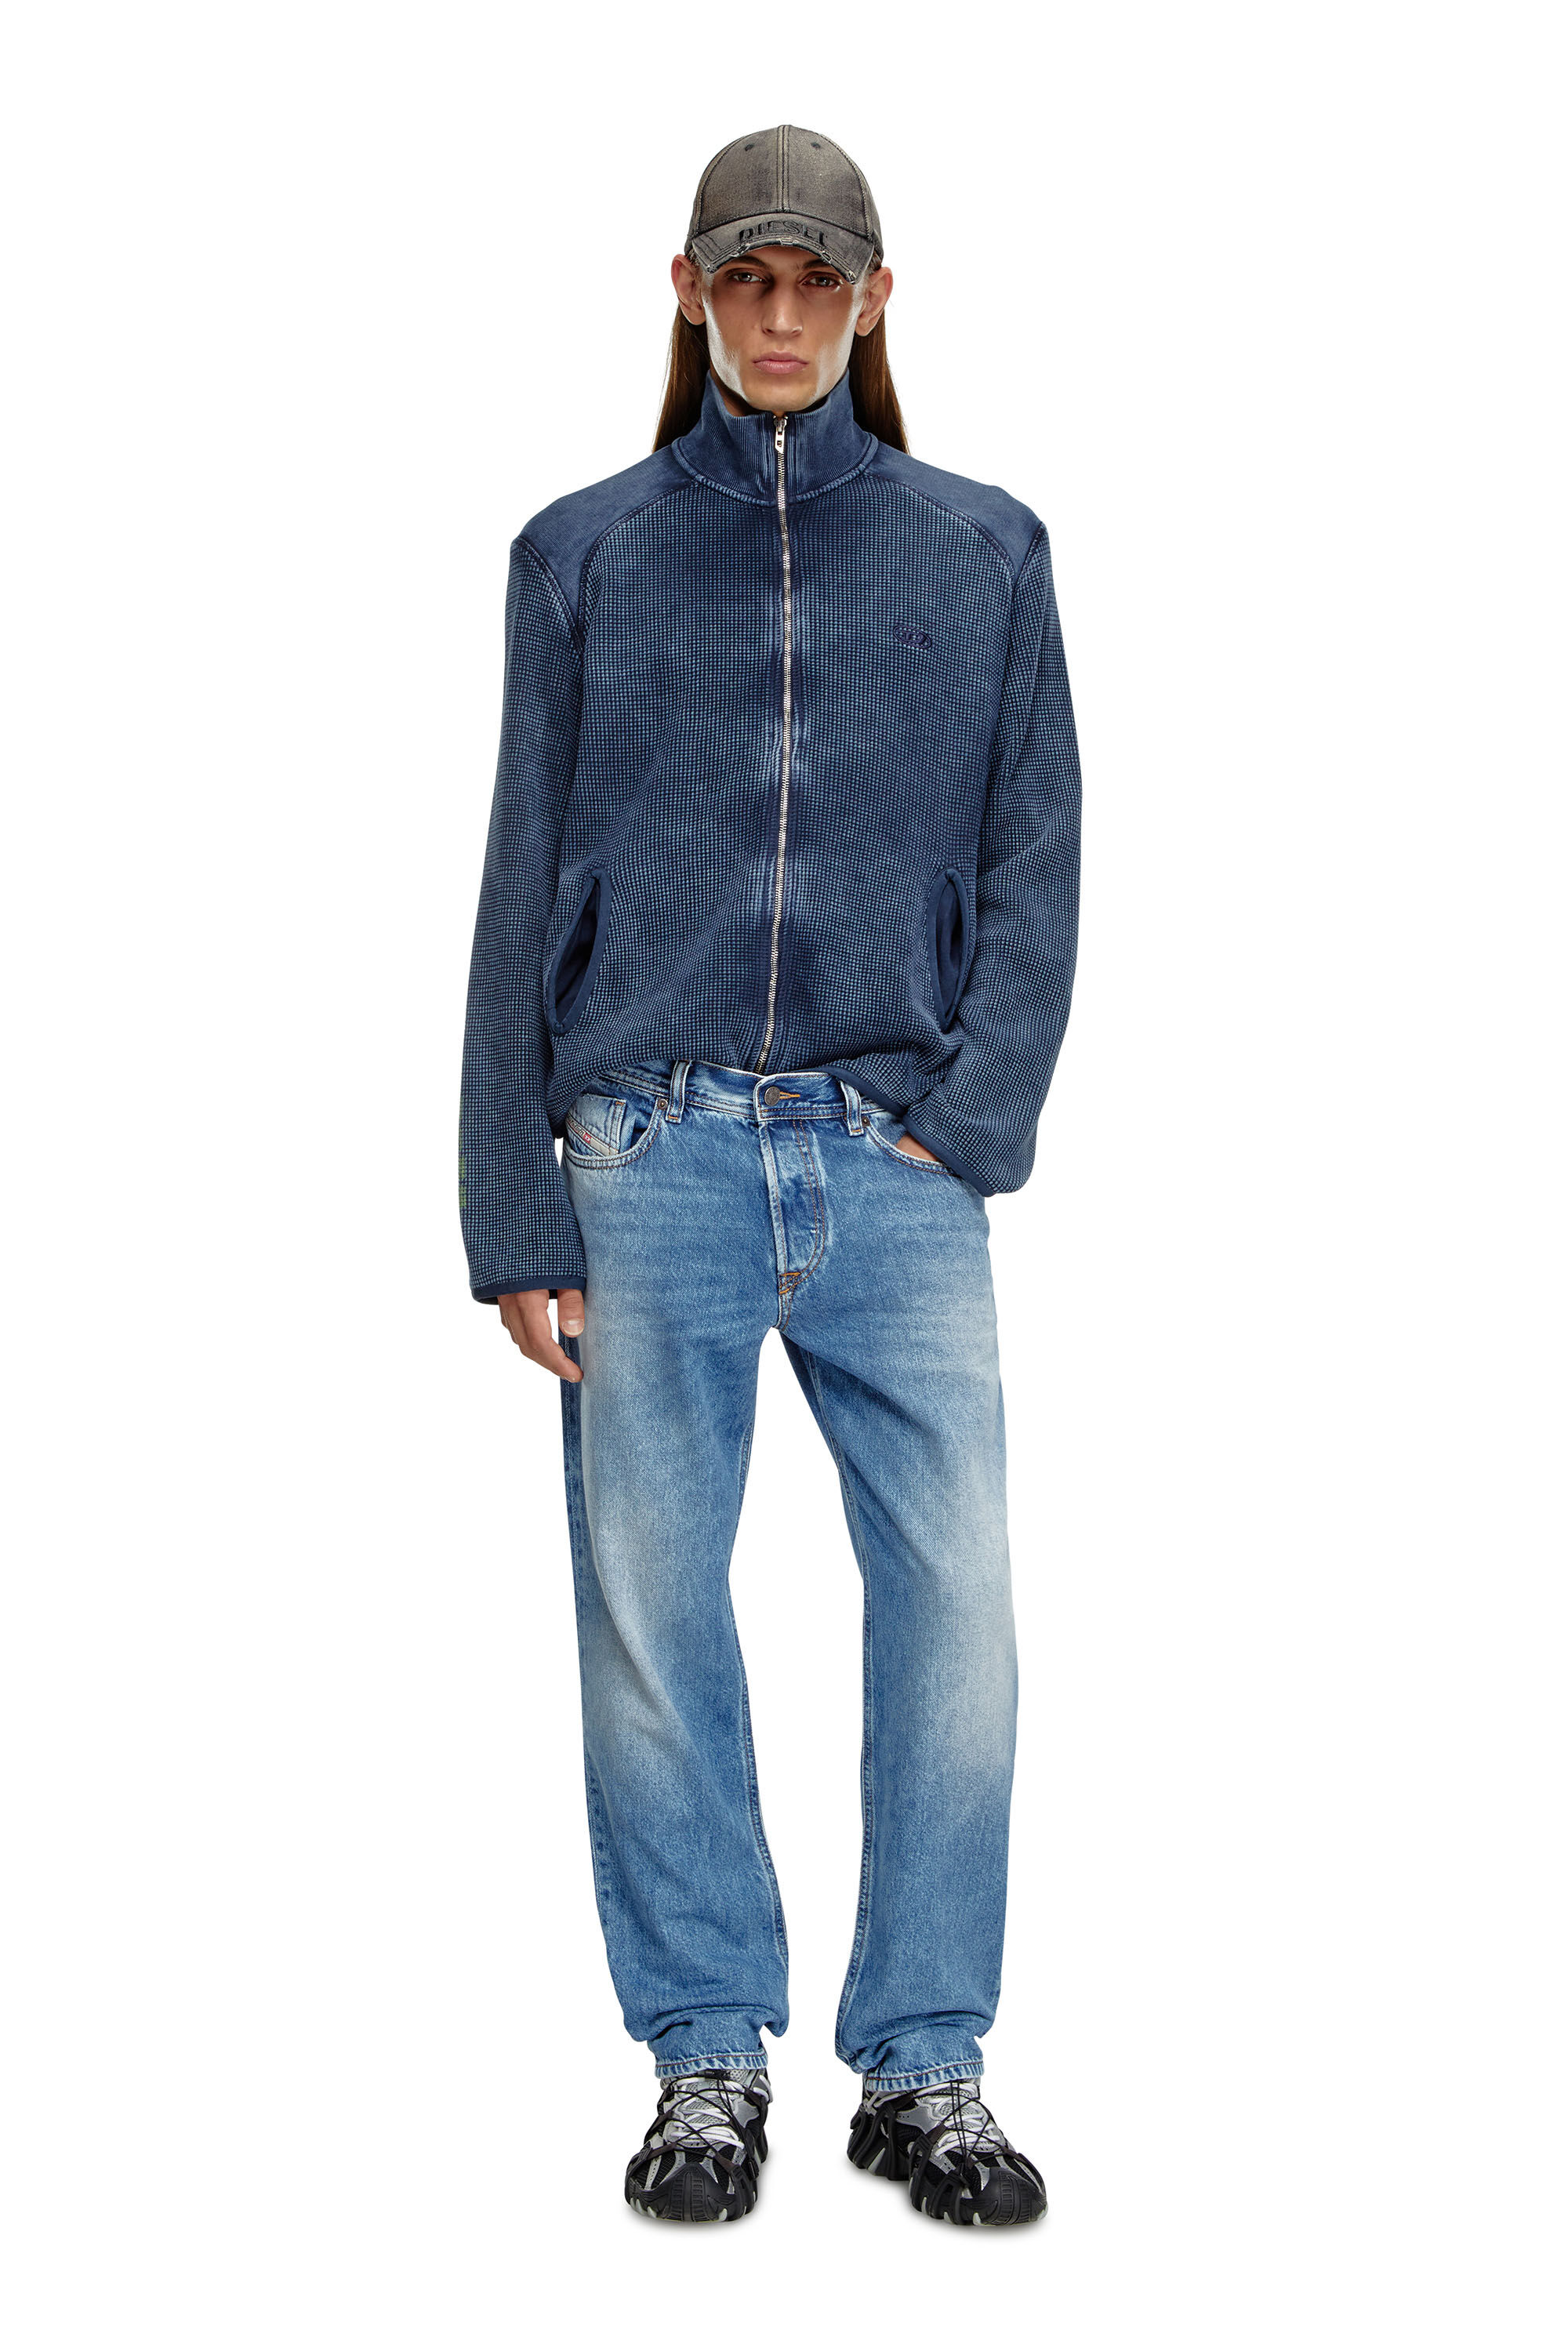 Diesel - Tapered Jeans 2023 D-Finitive 09H95, Hombre Tapered Jeans - 2023 D-Finitive in Azul marino - Image 1